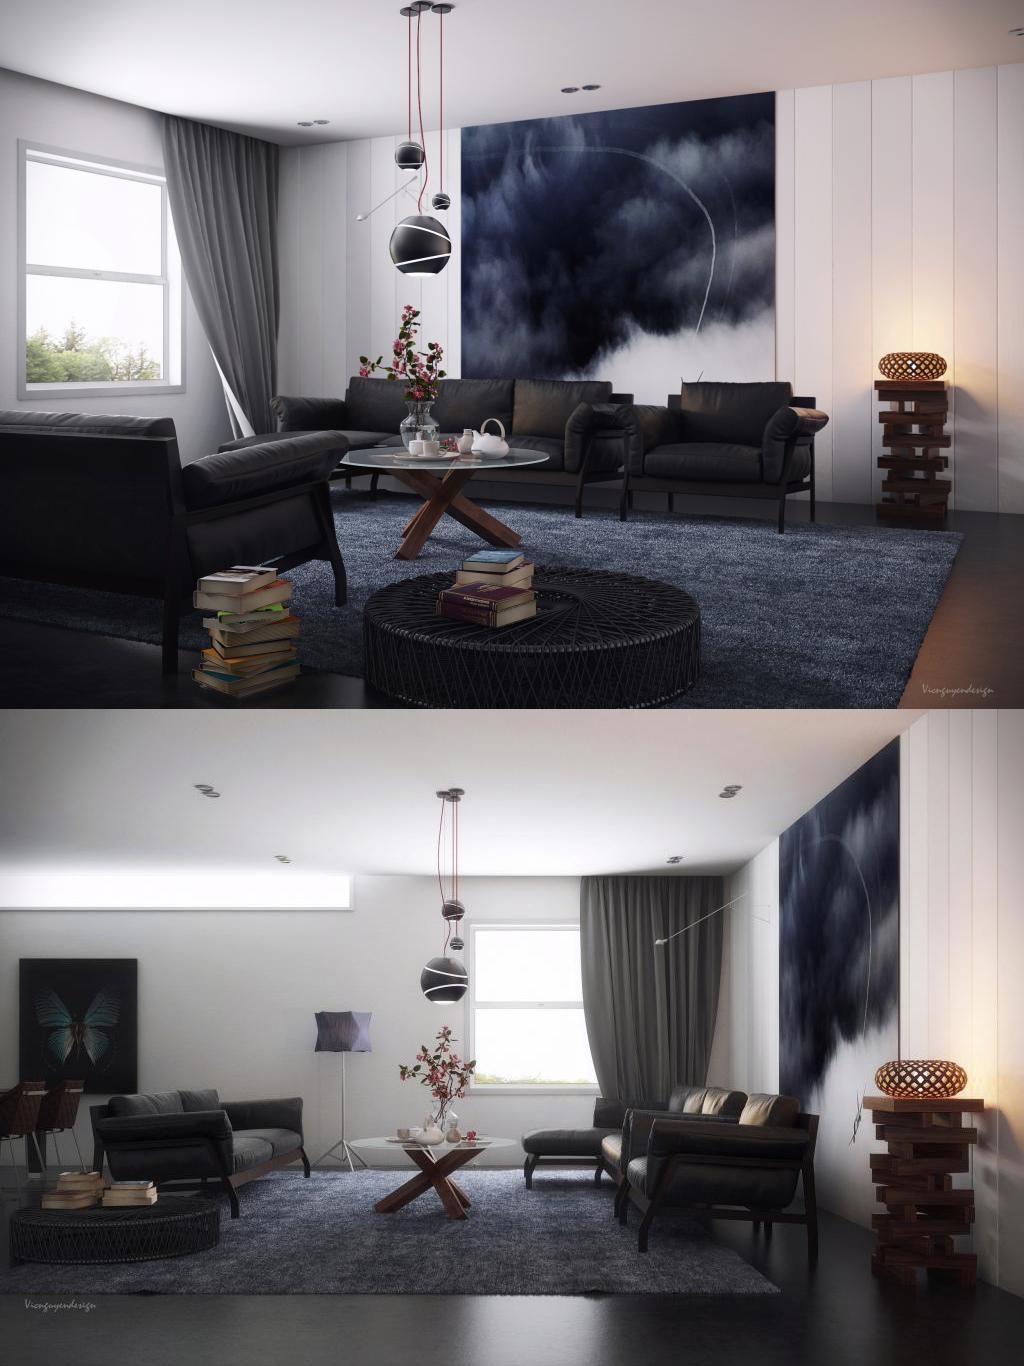 spacious gray living room design "width =" 1024 "height =" 1366 "srcset =" https://mileray.com/wp-content/uploads/2020/05/1588515788_119_Awesome-Living-Room-Design-Ideas-With-Variety-of-Trendy-and.jpeg 1024w, https: // myfashionos. com / wp-content / uploads / 2016/09 / Vic-Nguyen-225x300.jpeg 225w, https://mileray.com/wp-content/uploads/2016/09/Vic-Nguyen-768x1024.jpeg 768w, https: //mileray.com/wp-content/uploads/2016/09/Vic-Nguyen-696x928.jpeg 696w, https://mileray.com/wp-content/uploads/2016/09/Vic-Nguyen-315x420.jpeg 315w "sizes =" (maximum width: 1024px) 100vw, 1024px